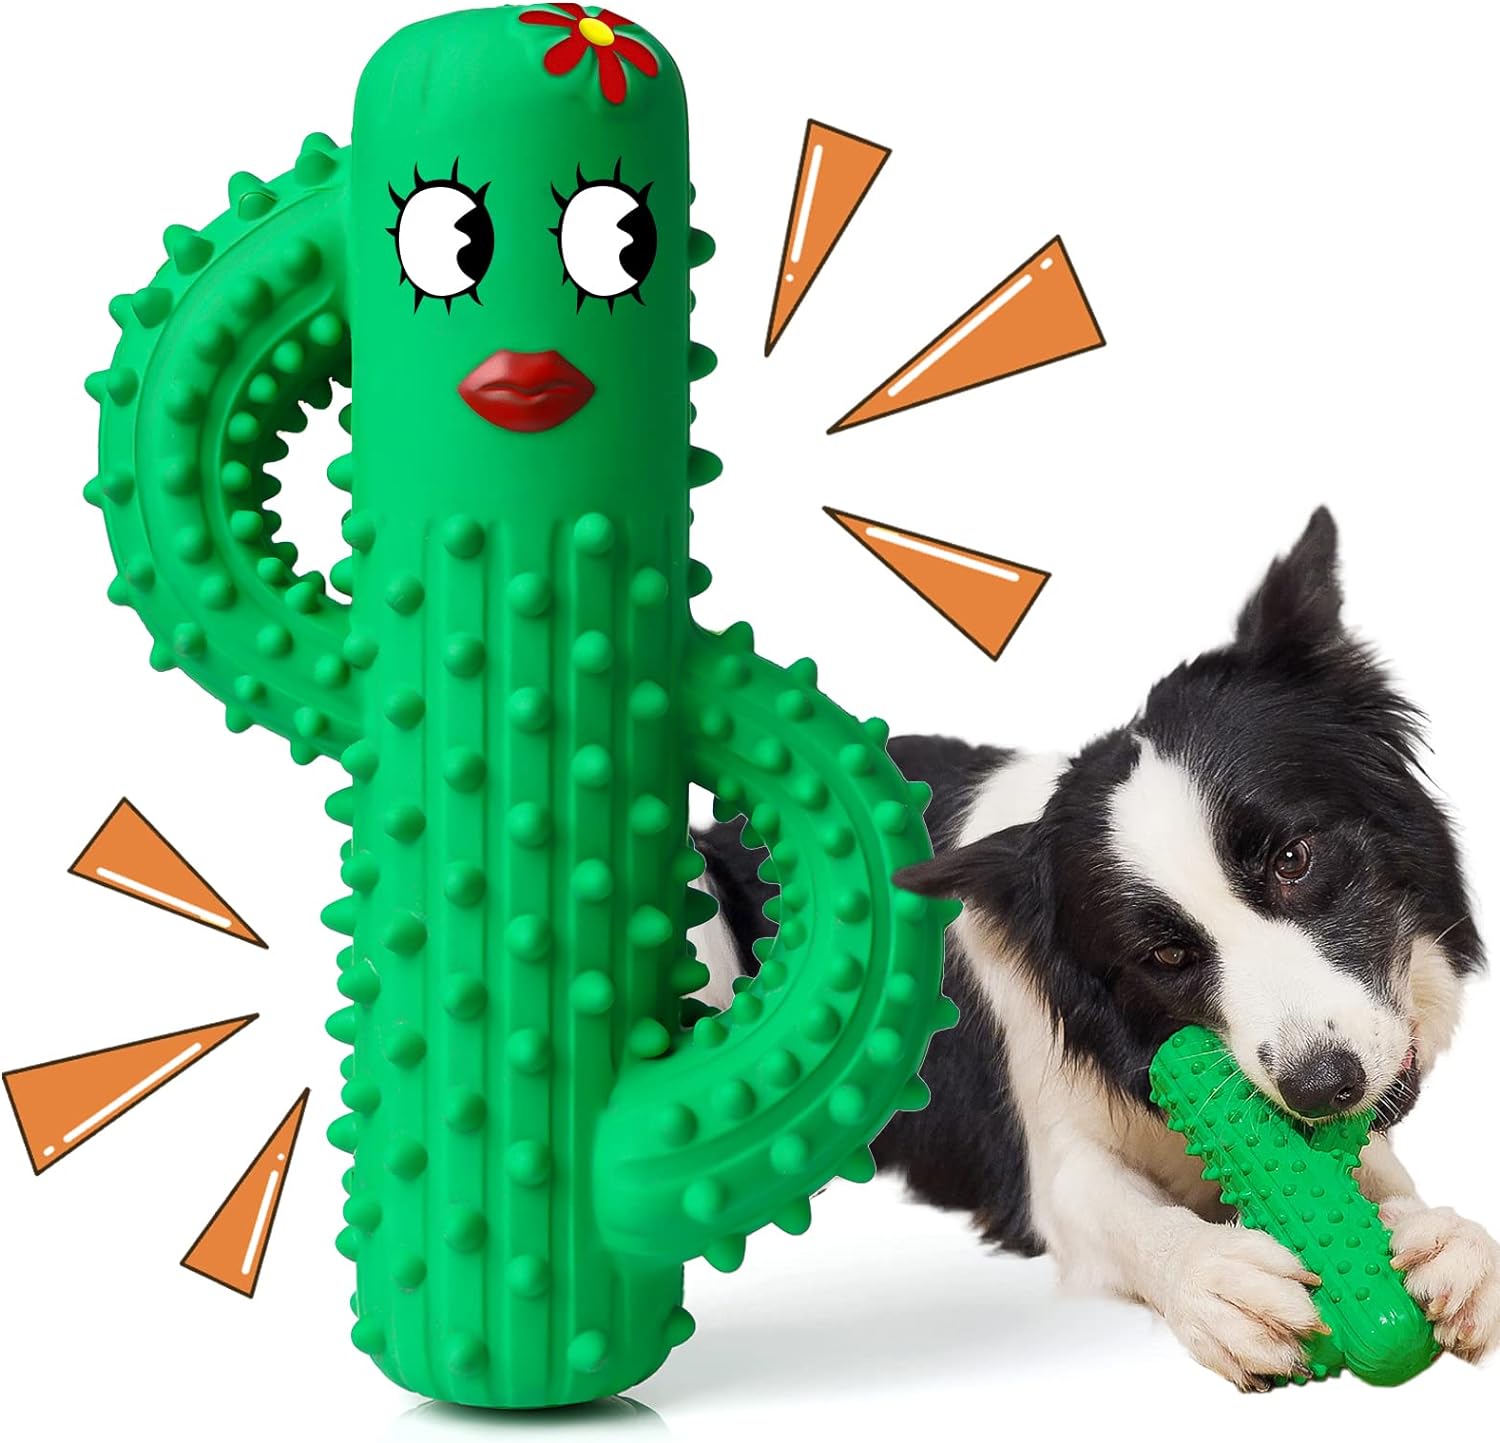 Sugelary Dog Chew Toys, Indestructible Squeaky Tough Dog Toys for Aggressive Chewers, Puppy Teething Toys for Small Medium Large Dogs